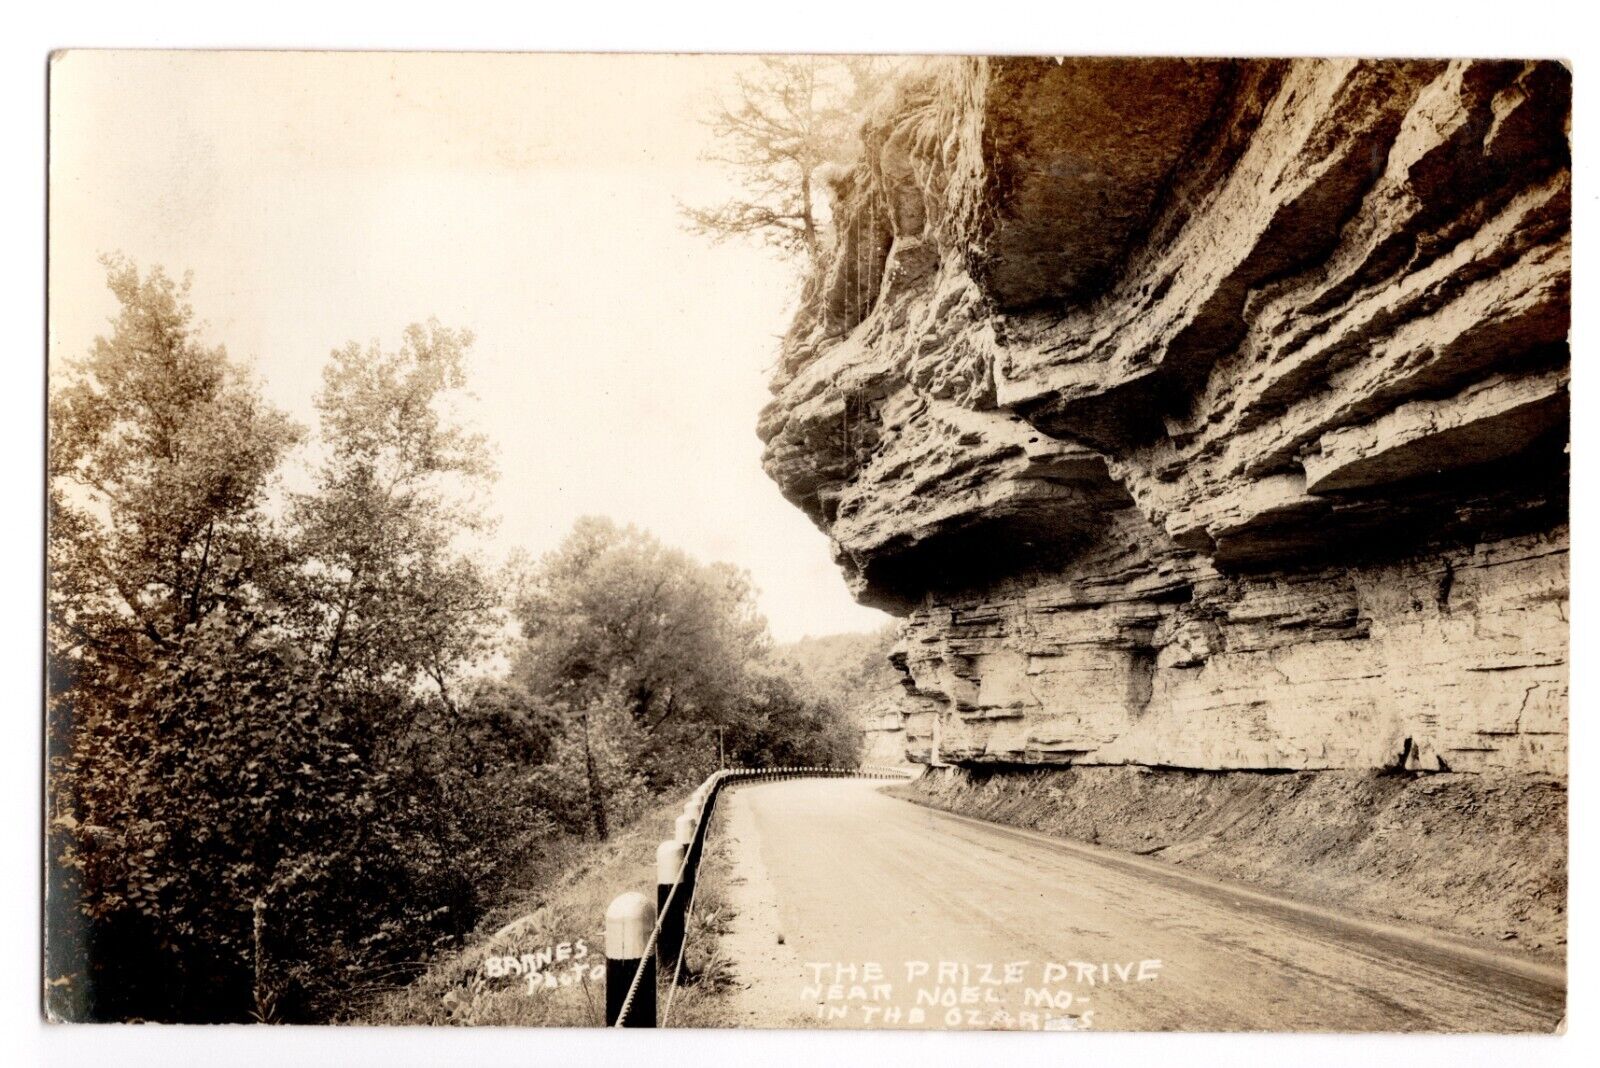 RPPC Real Photo Postcard - The Prize Drive, near Noel, MO in the Ozarks, road